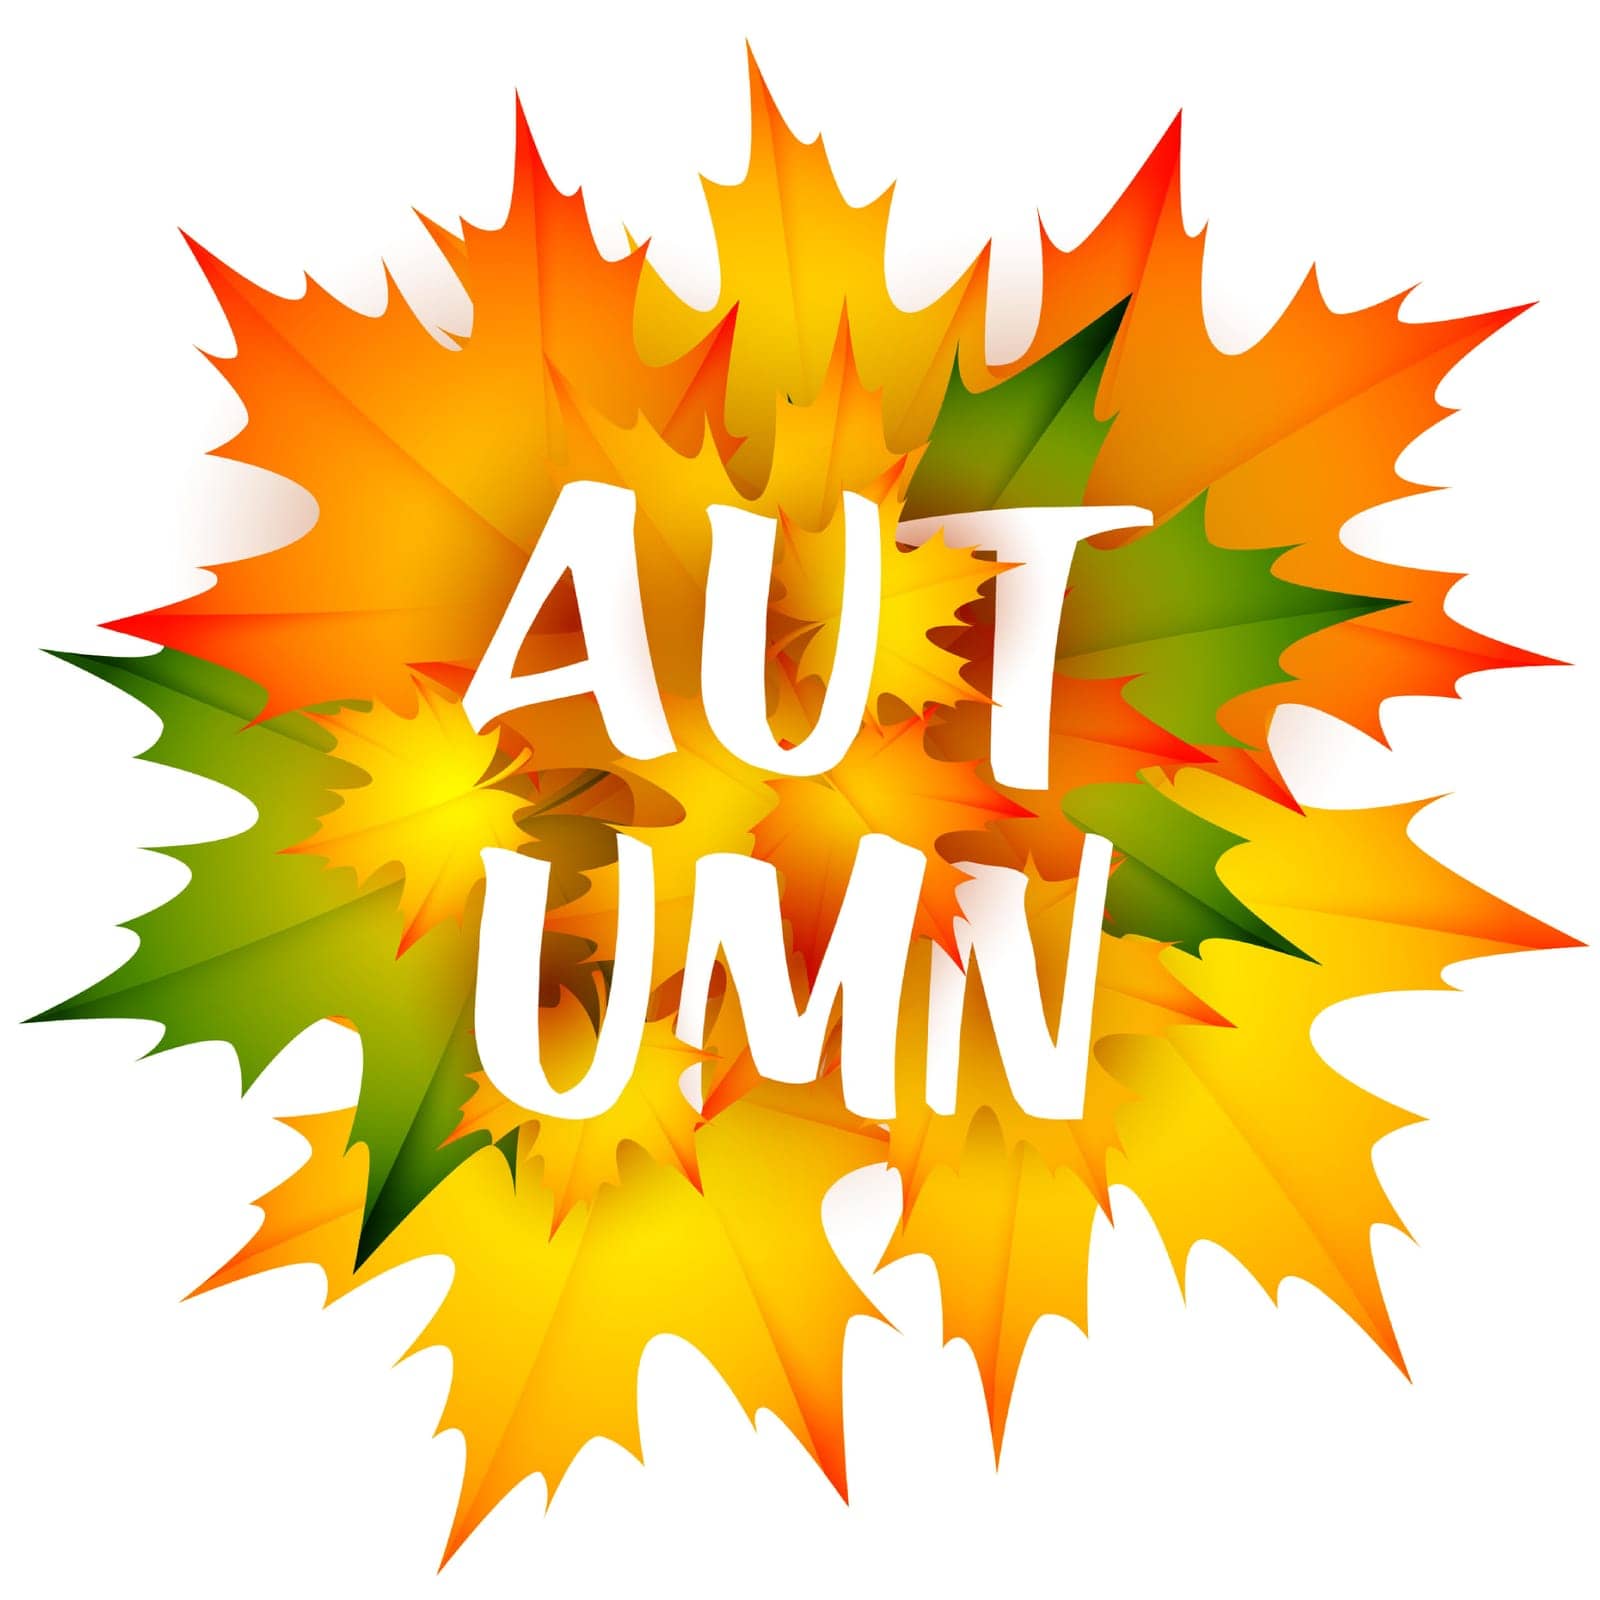 Autumn seasonal leaflet design with bunch of leaves. Handwritten text with orange, green and yellow maple foliage. Vector illustration can be used for banners, brochures, greeting cards